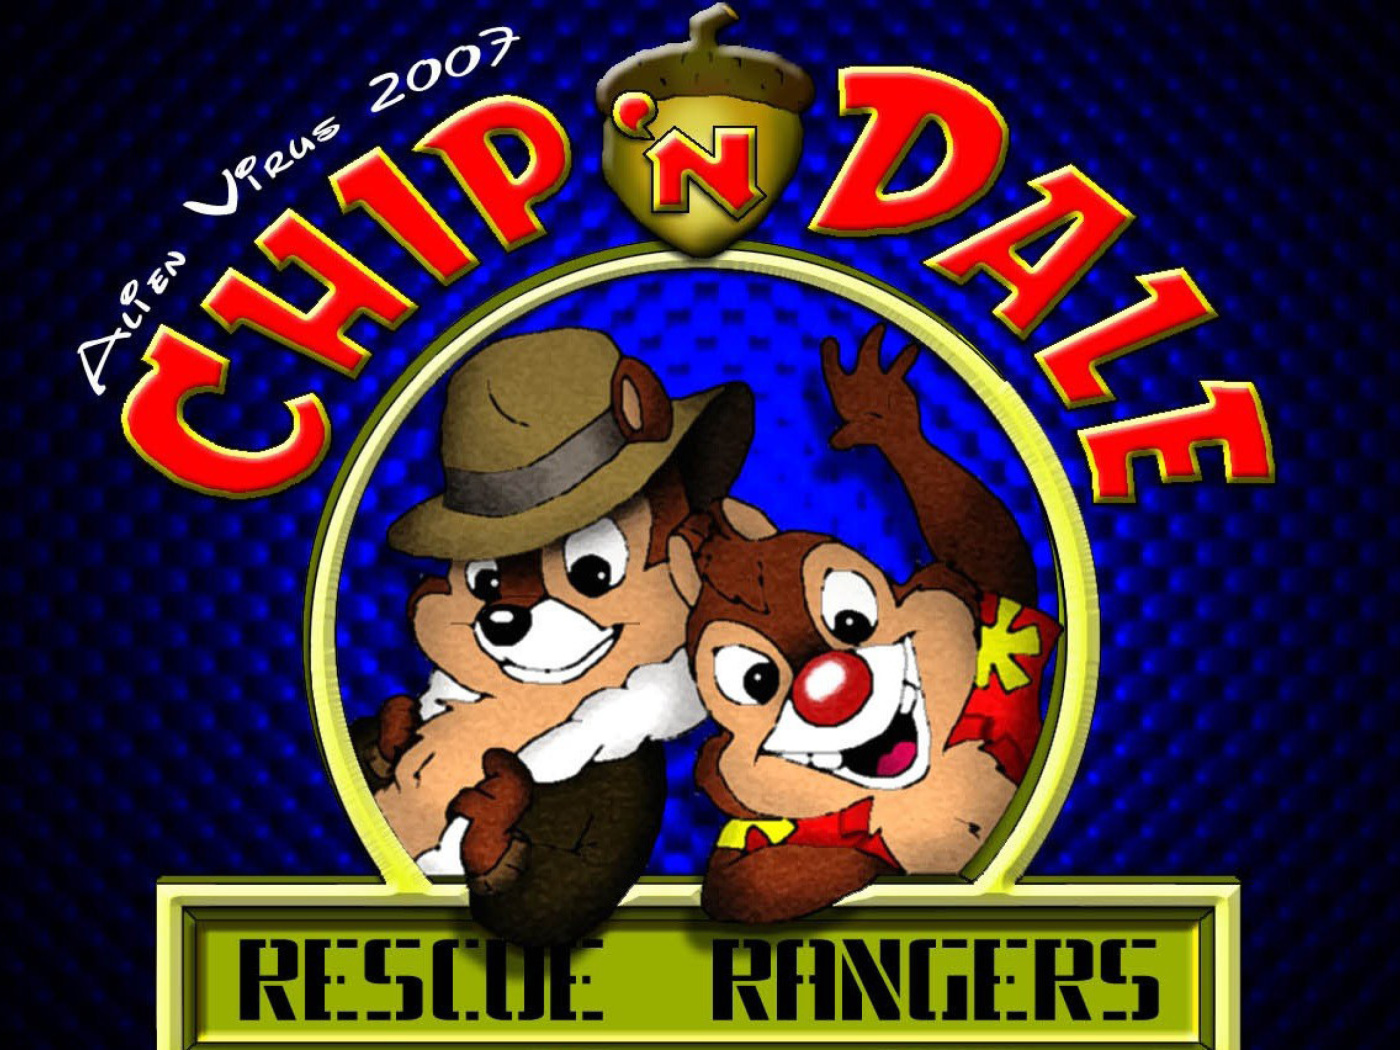 Chip and Dale Cartoon wallpaper 1400x1050